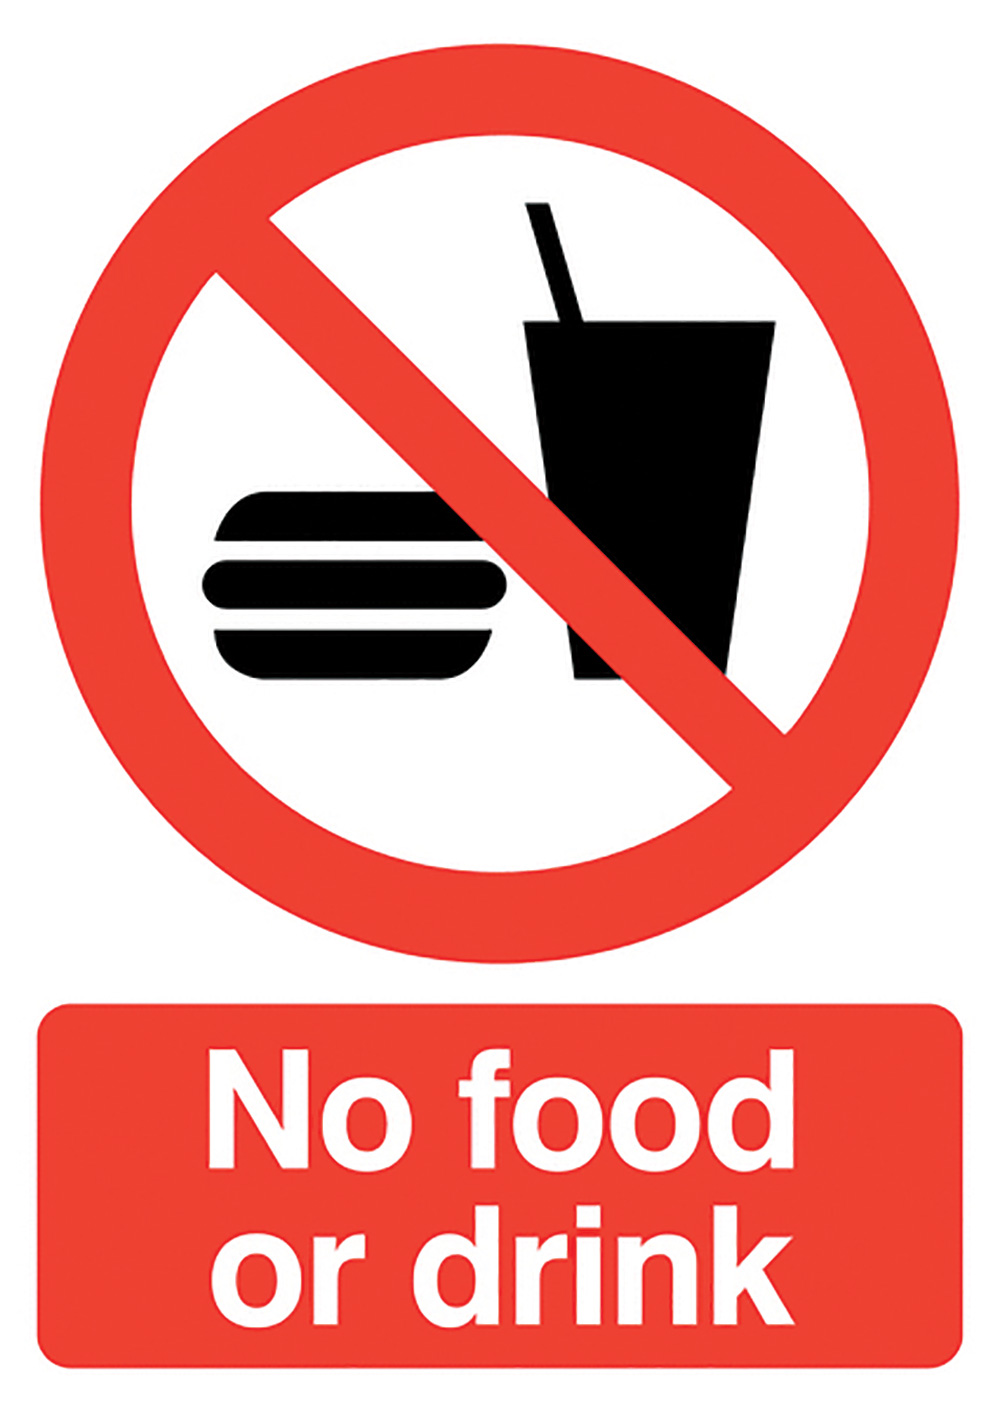 No Food or Drink  297x210mm 1.2mm Rigid Plastic Safety Sign  